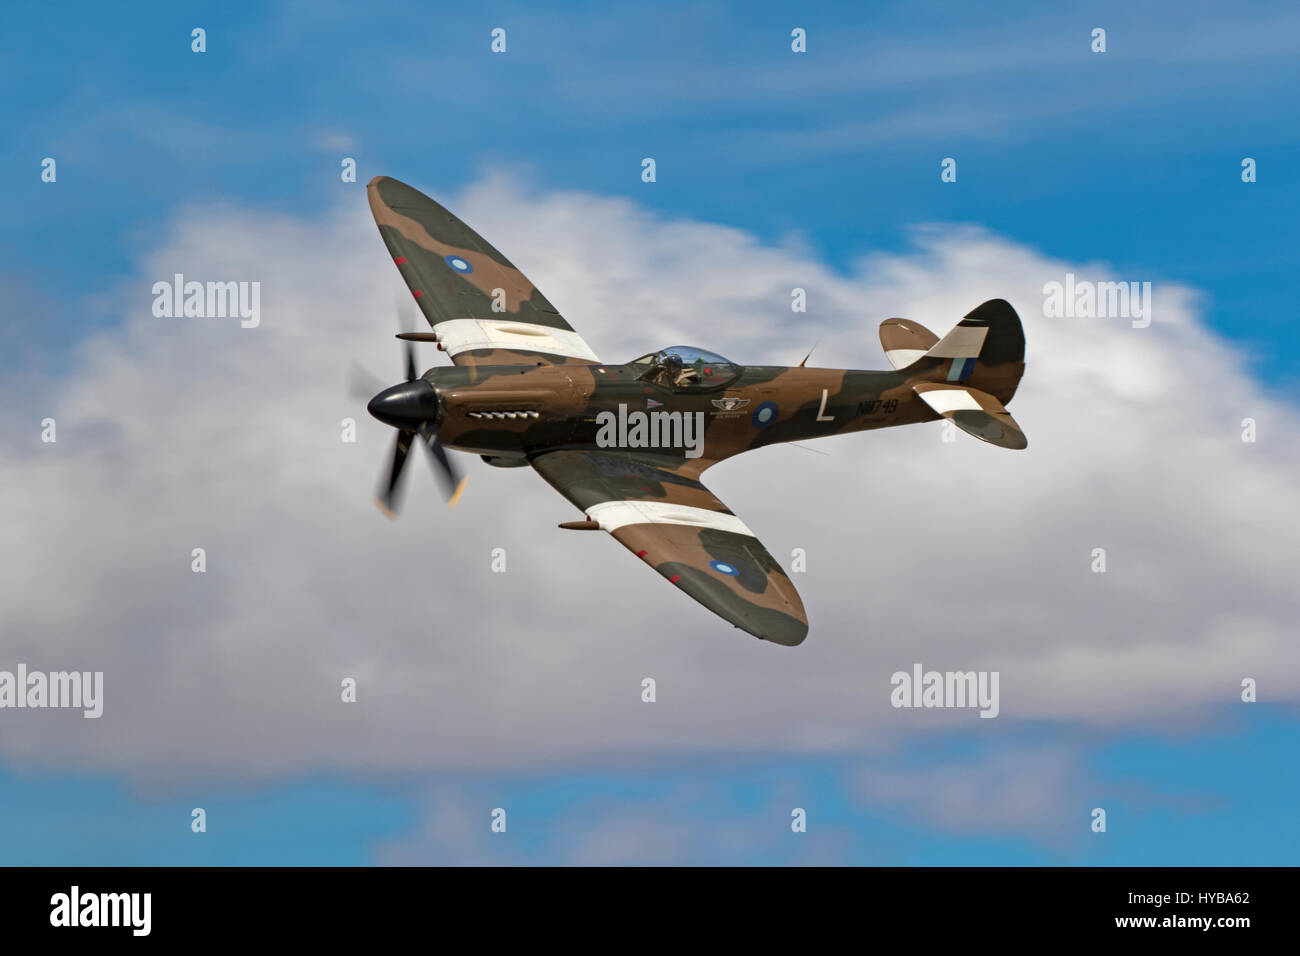 Airplane Submarine Spitfire WWII vintage aircraft flying at air show Stock Photo